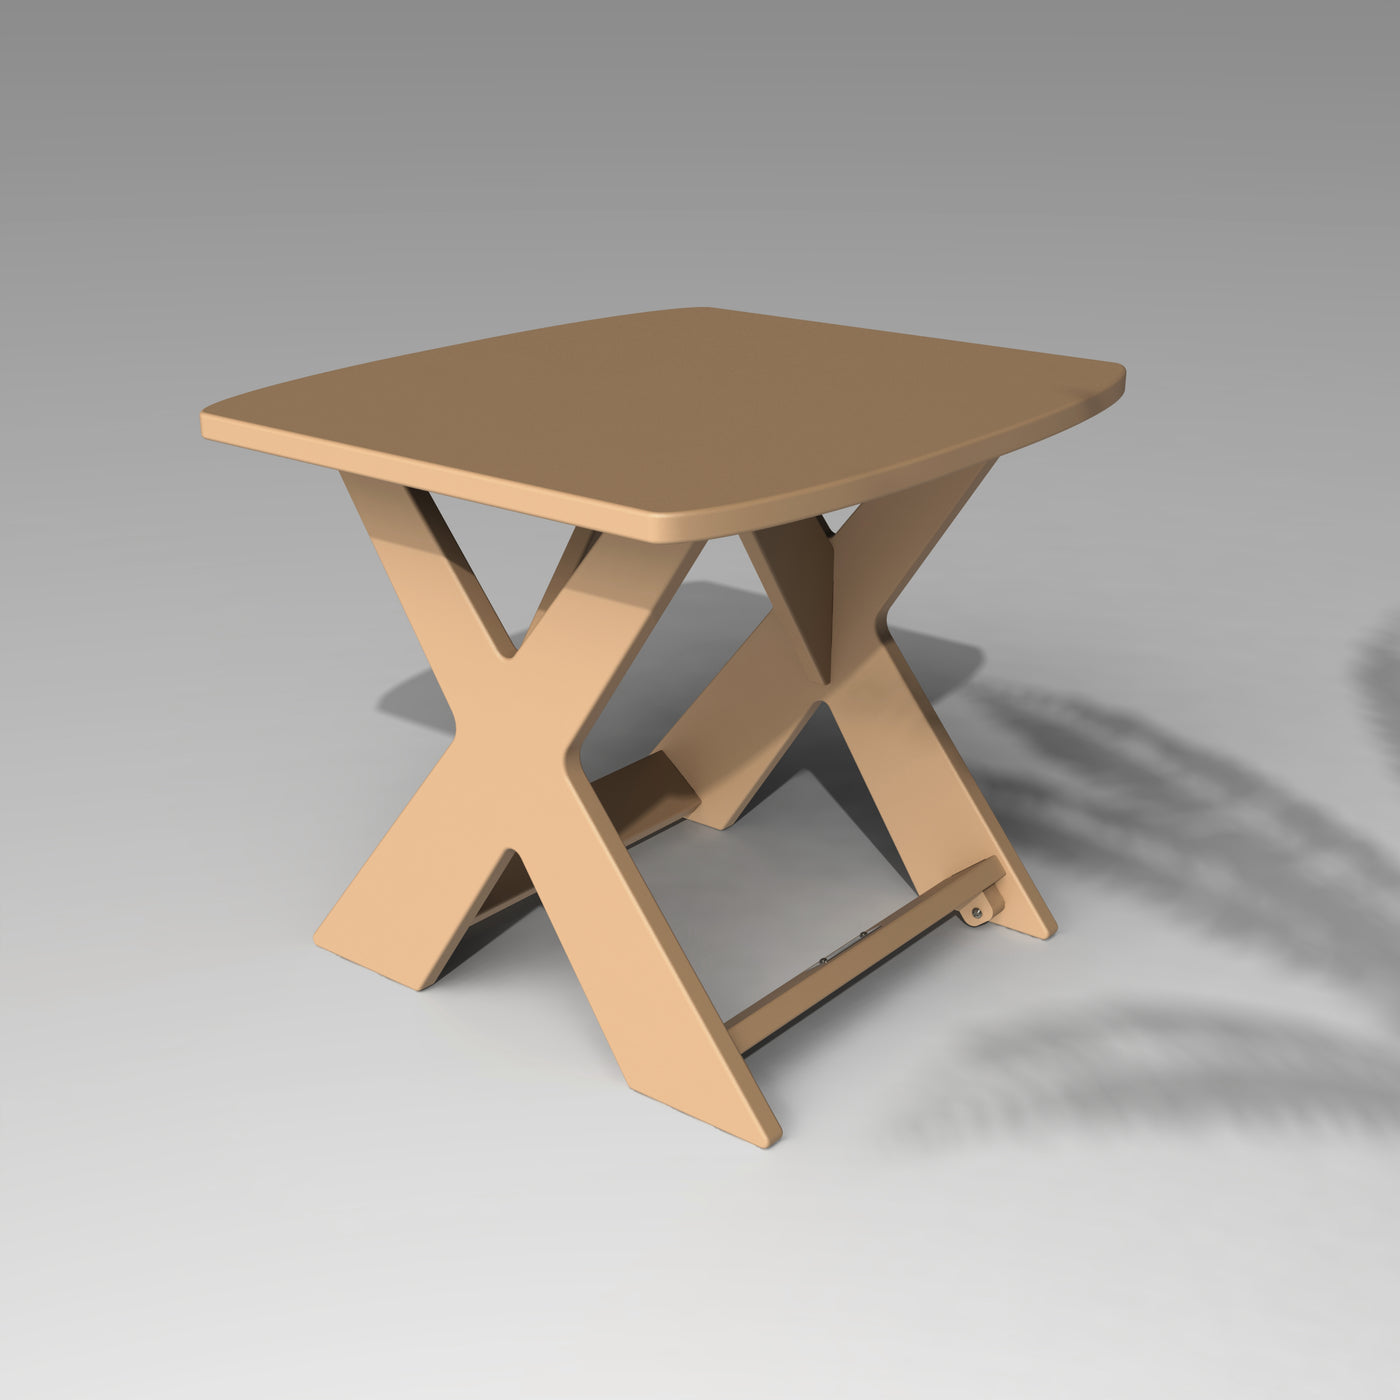 Share Side Table